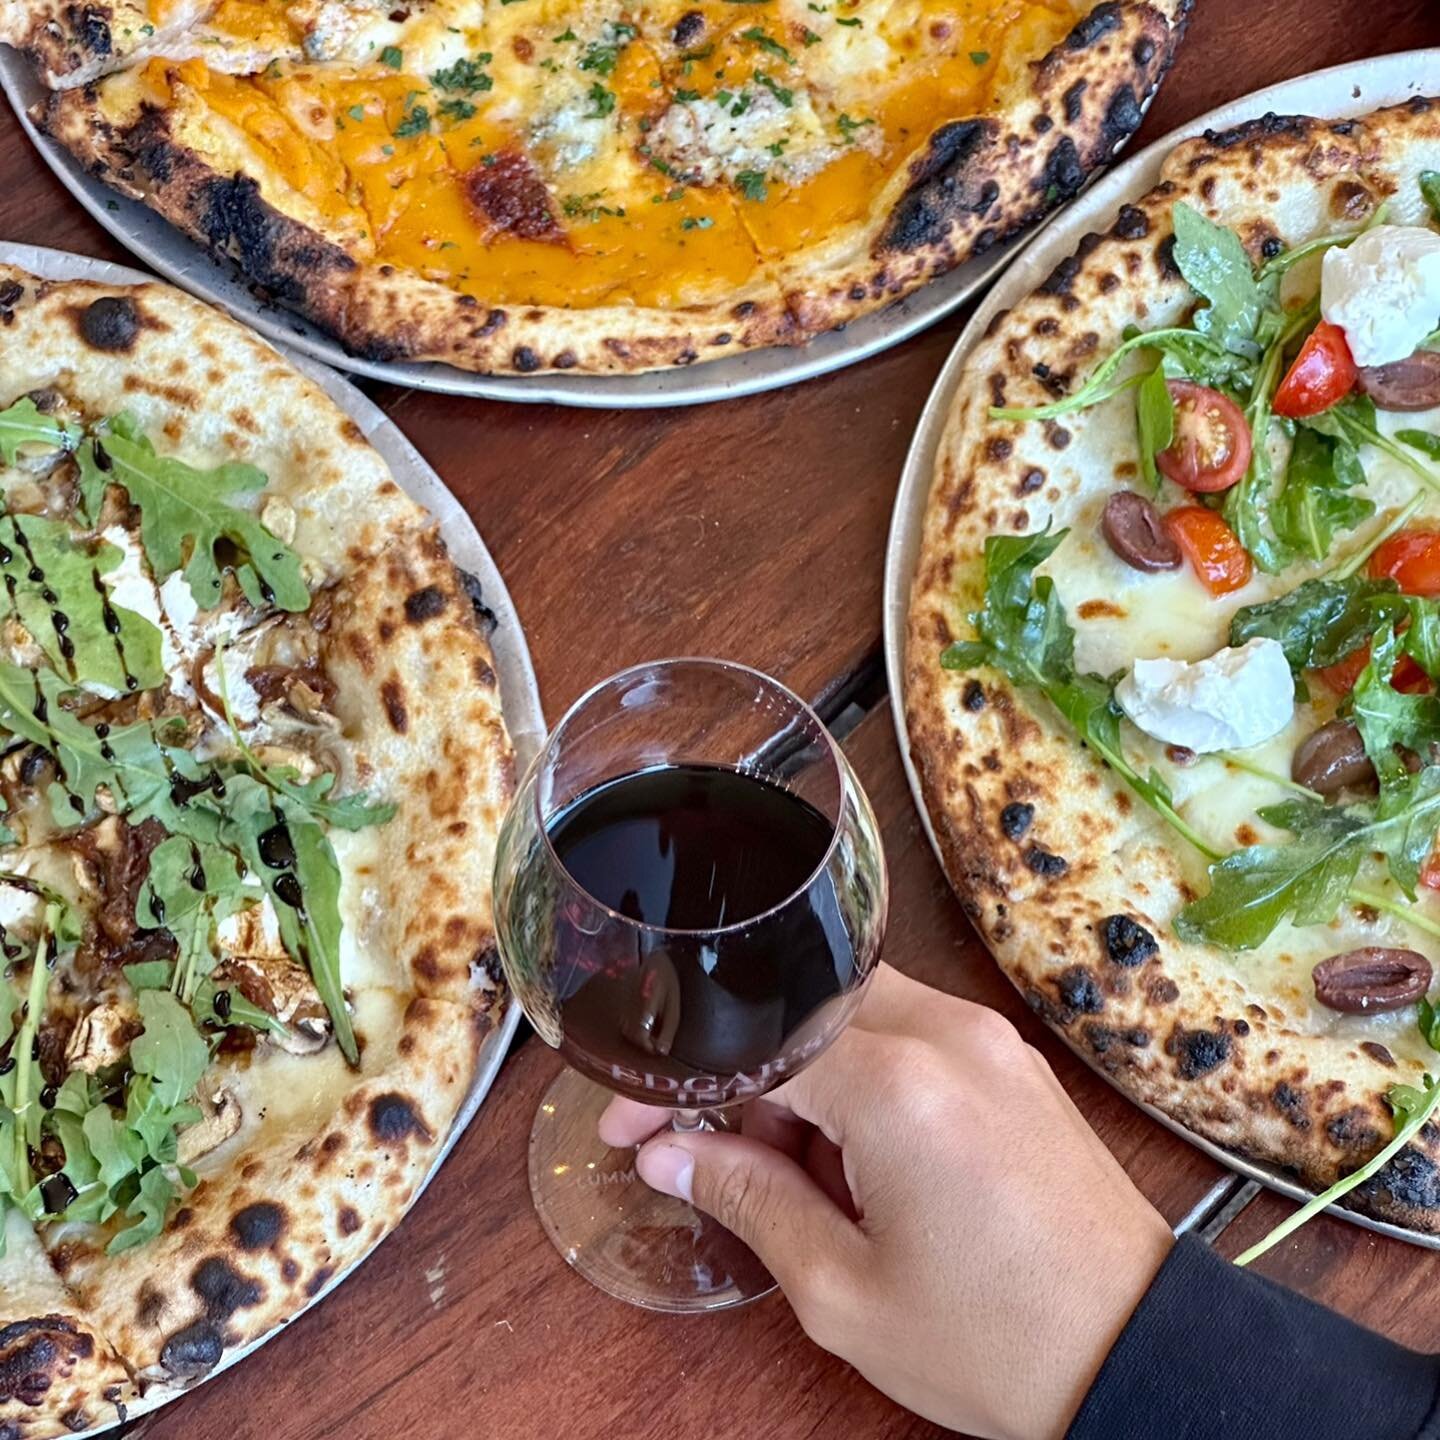 WIN A MAMA DOUGH FEAST FOR YOU AND YOUR MATES 🔥🍕

Cheers to debuting our new Mama Dough menu, we wanted to give a group of 5 friends the chance to come and try ALL the NEW pizzas we have on offer! 

TO ENTER SIMPLY:

🍕 Comment and tag your 5 frien